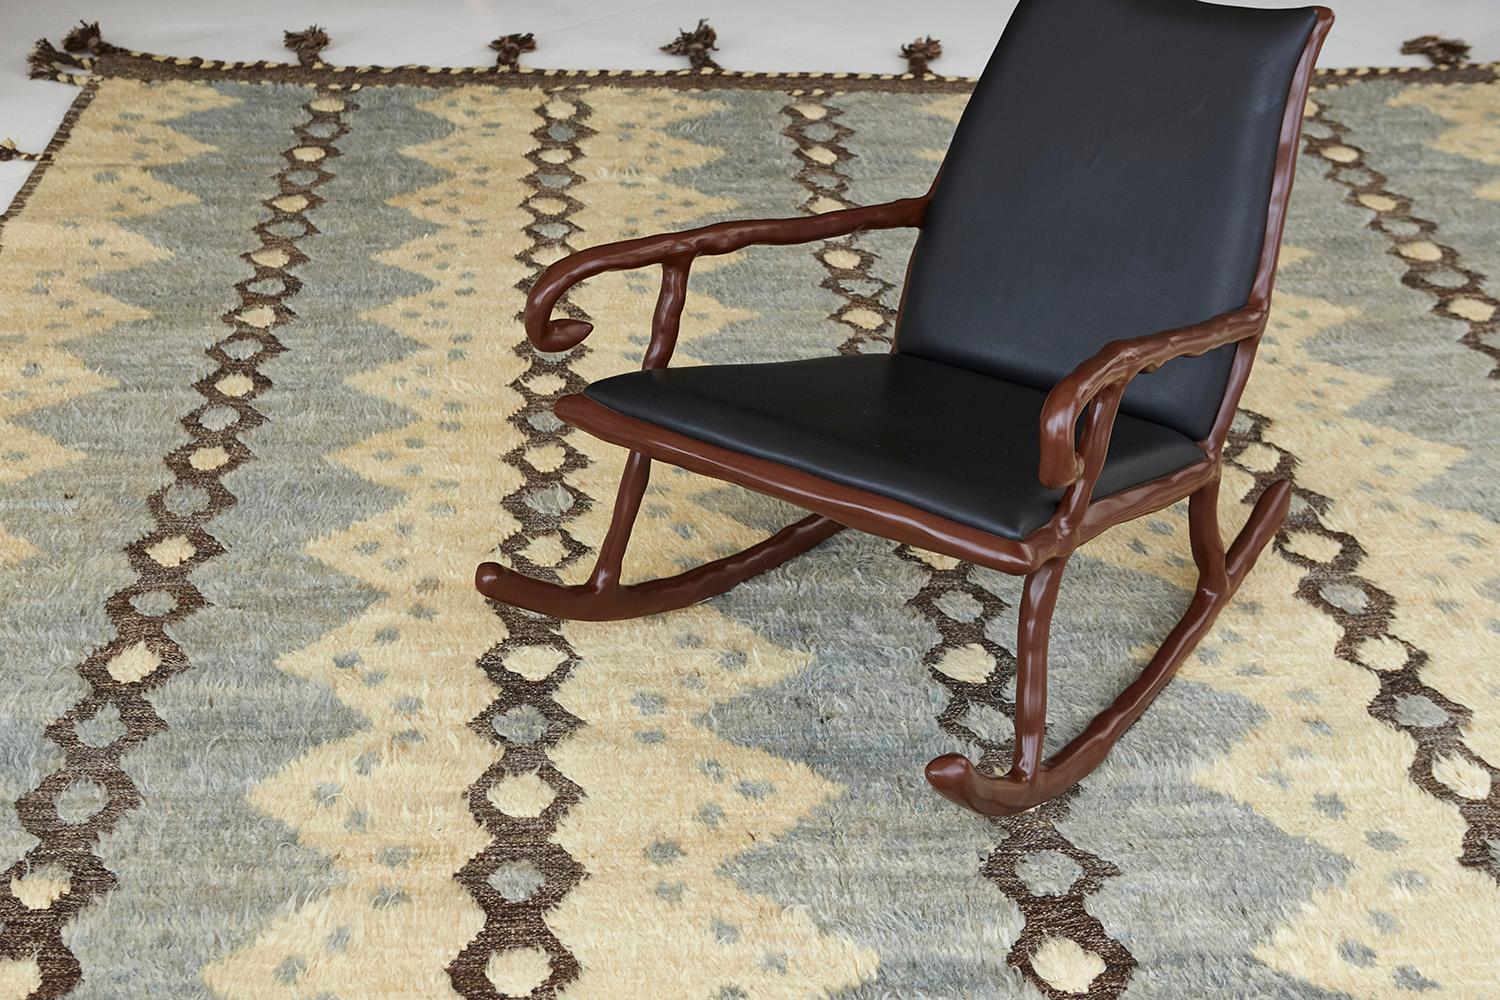 The 'Modlina' rug is a handwoven wool piece inspired by vintage Scandinavian design elements and recreated for the modern design world. The rug's shag balance and harmony, handwoven with a neutral flat weave and unique piles of yellow and natural